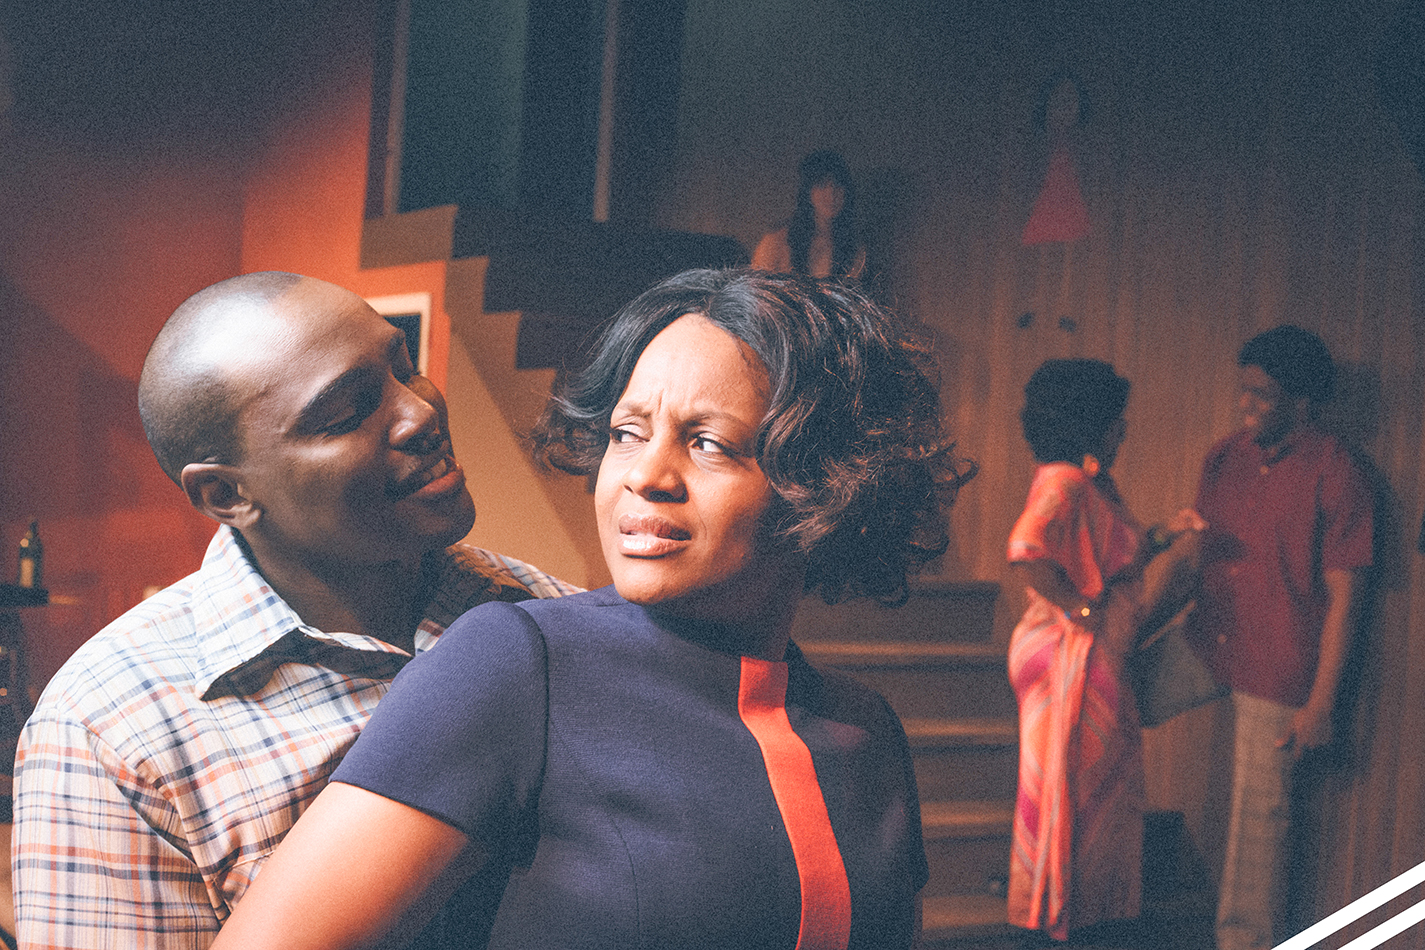 Chelle, played by JuNene K, and Sly, played by Orlando Valentino, perform a scene in Detroit ‘67, which centers around the racial tensions that led to the Detroit Riots in 1967.